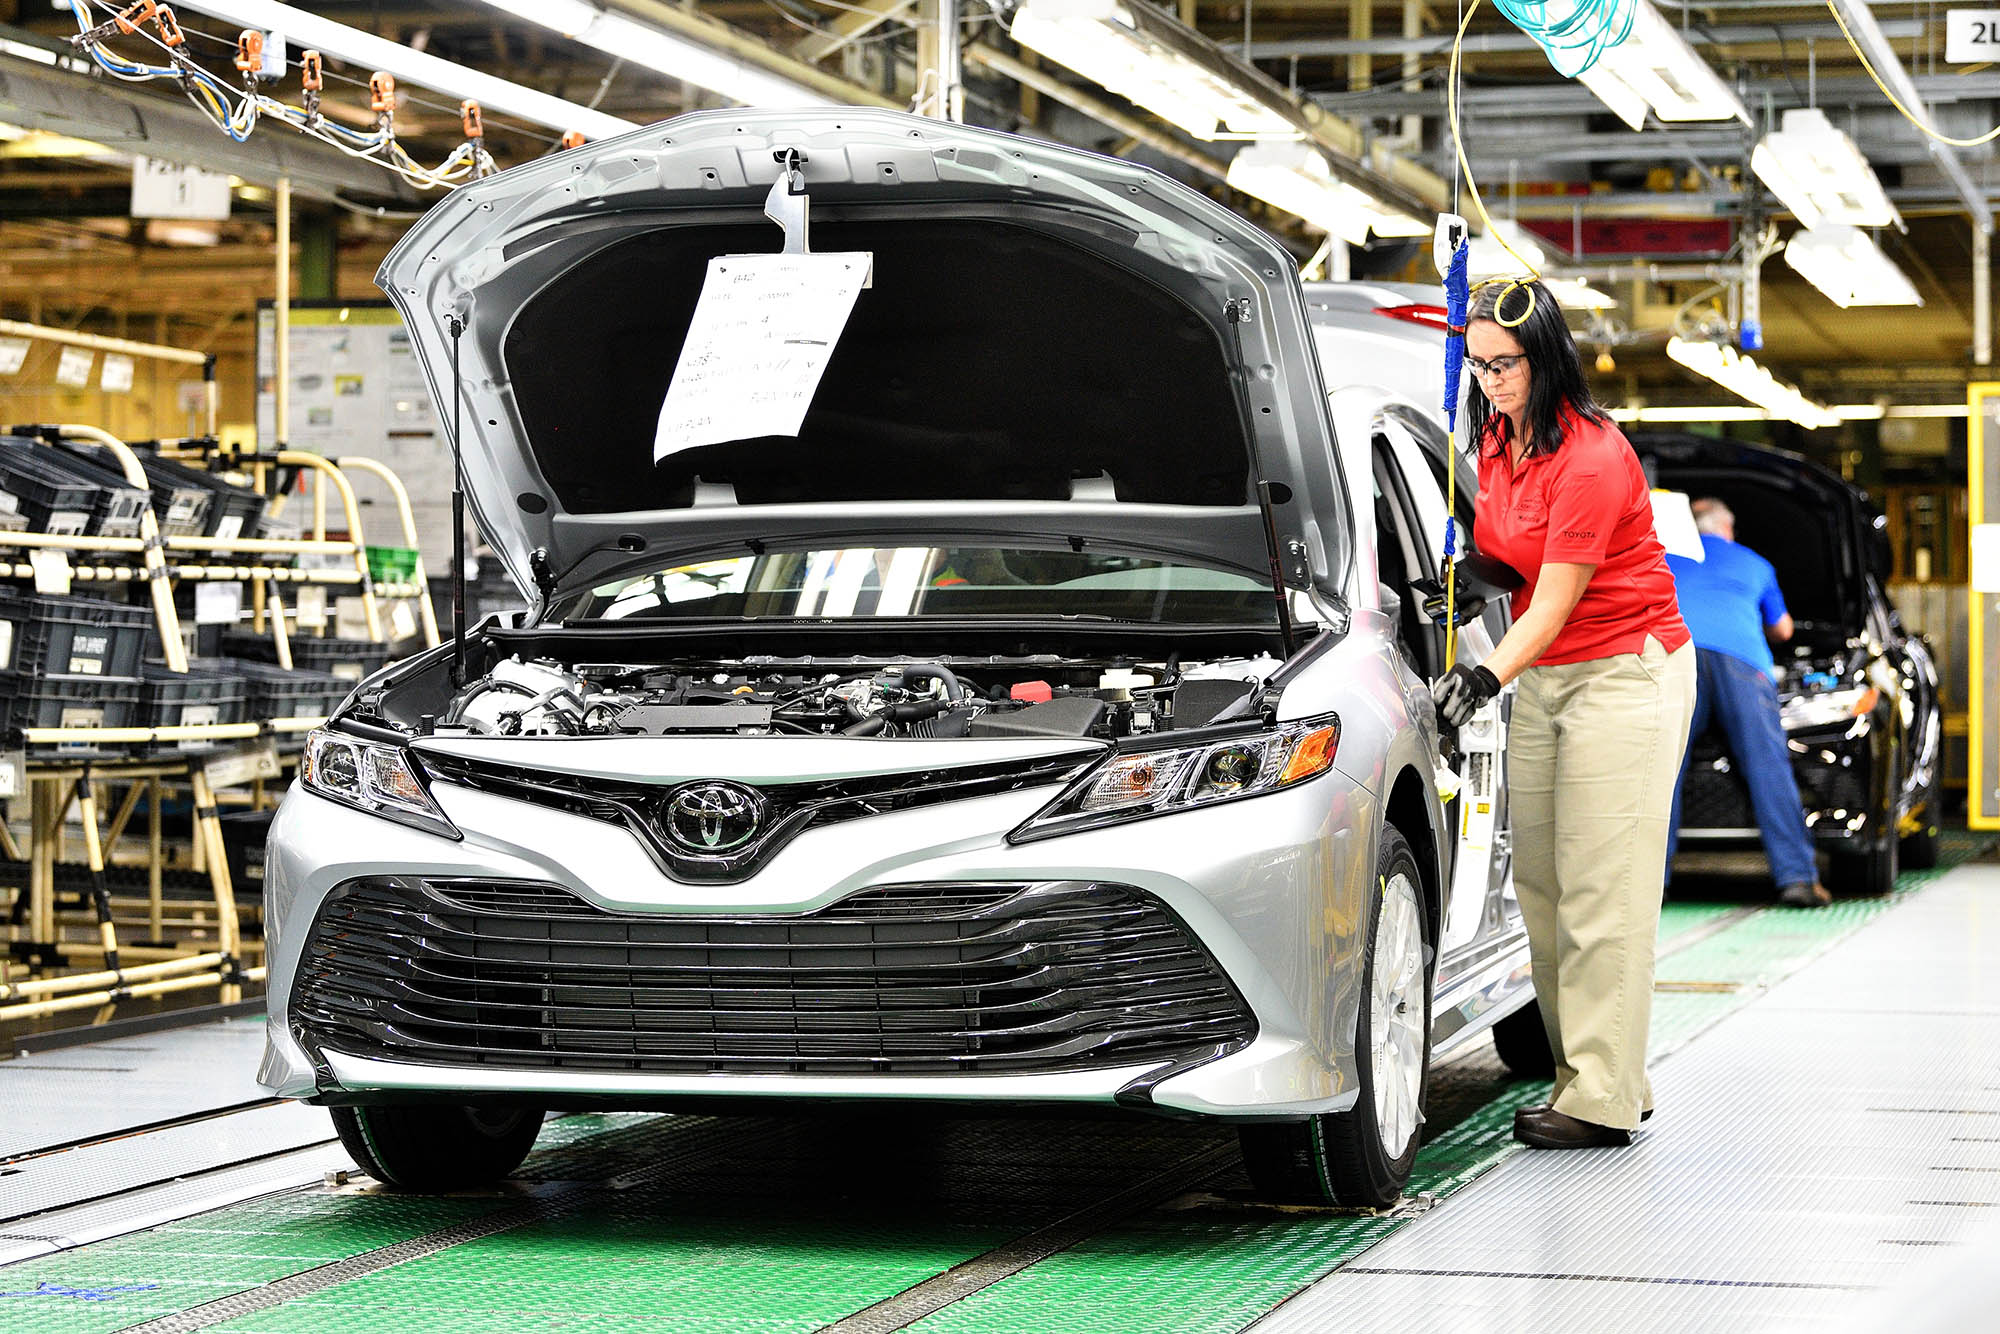 Camry production in Toyota's Georgetown, Kentucky, facility.